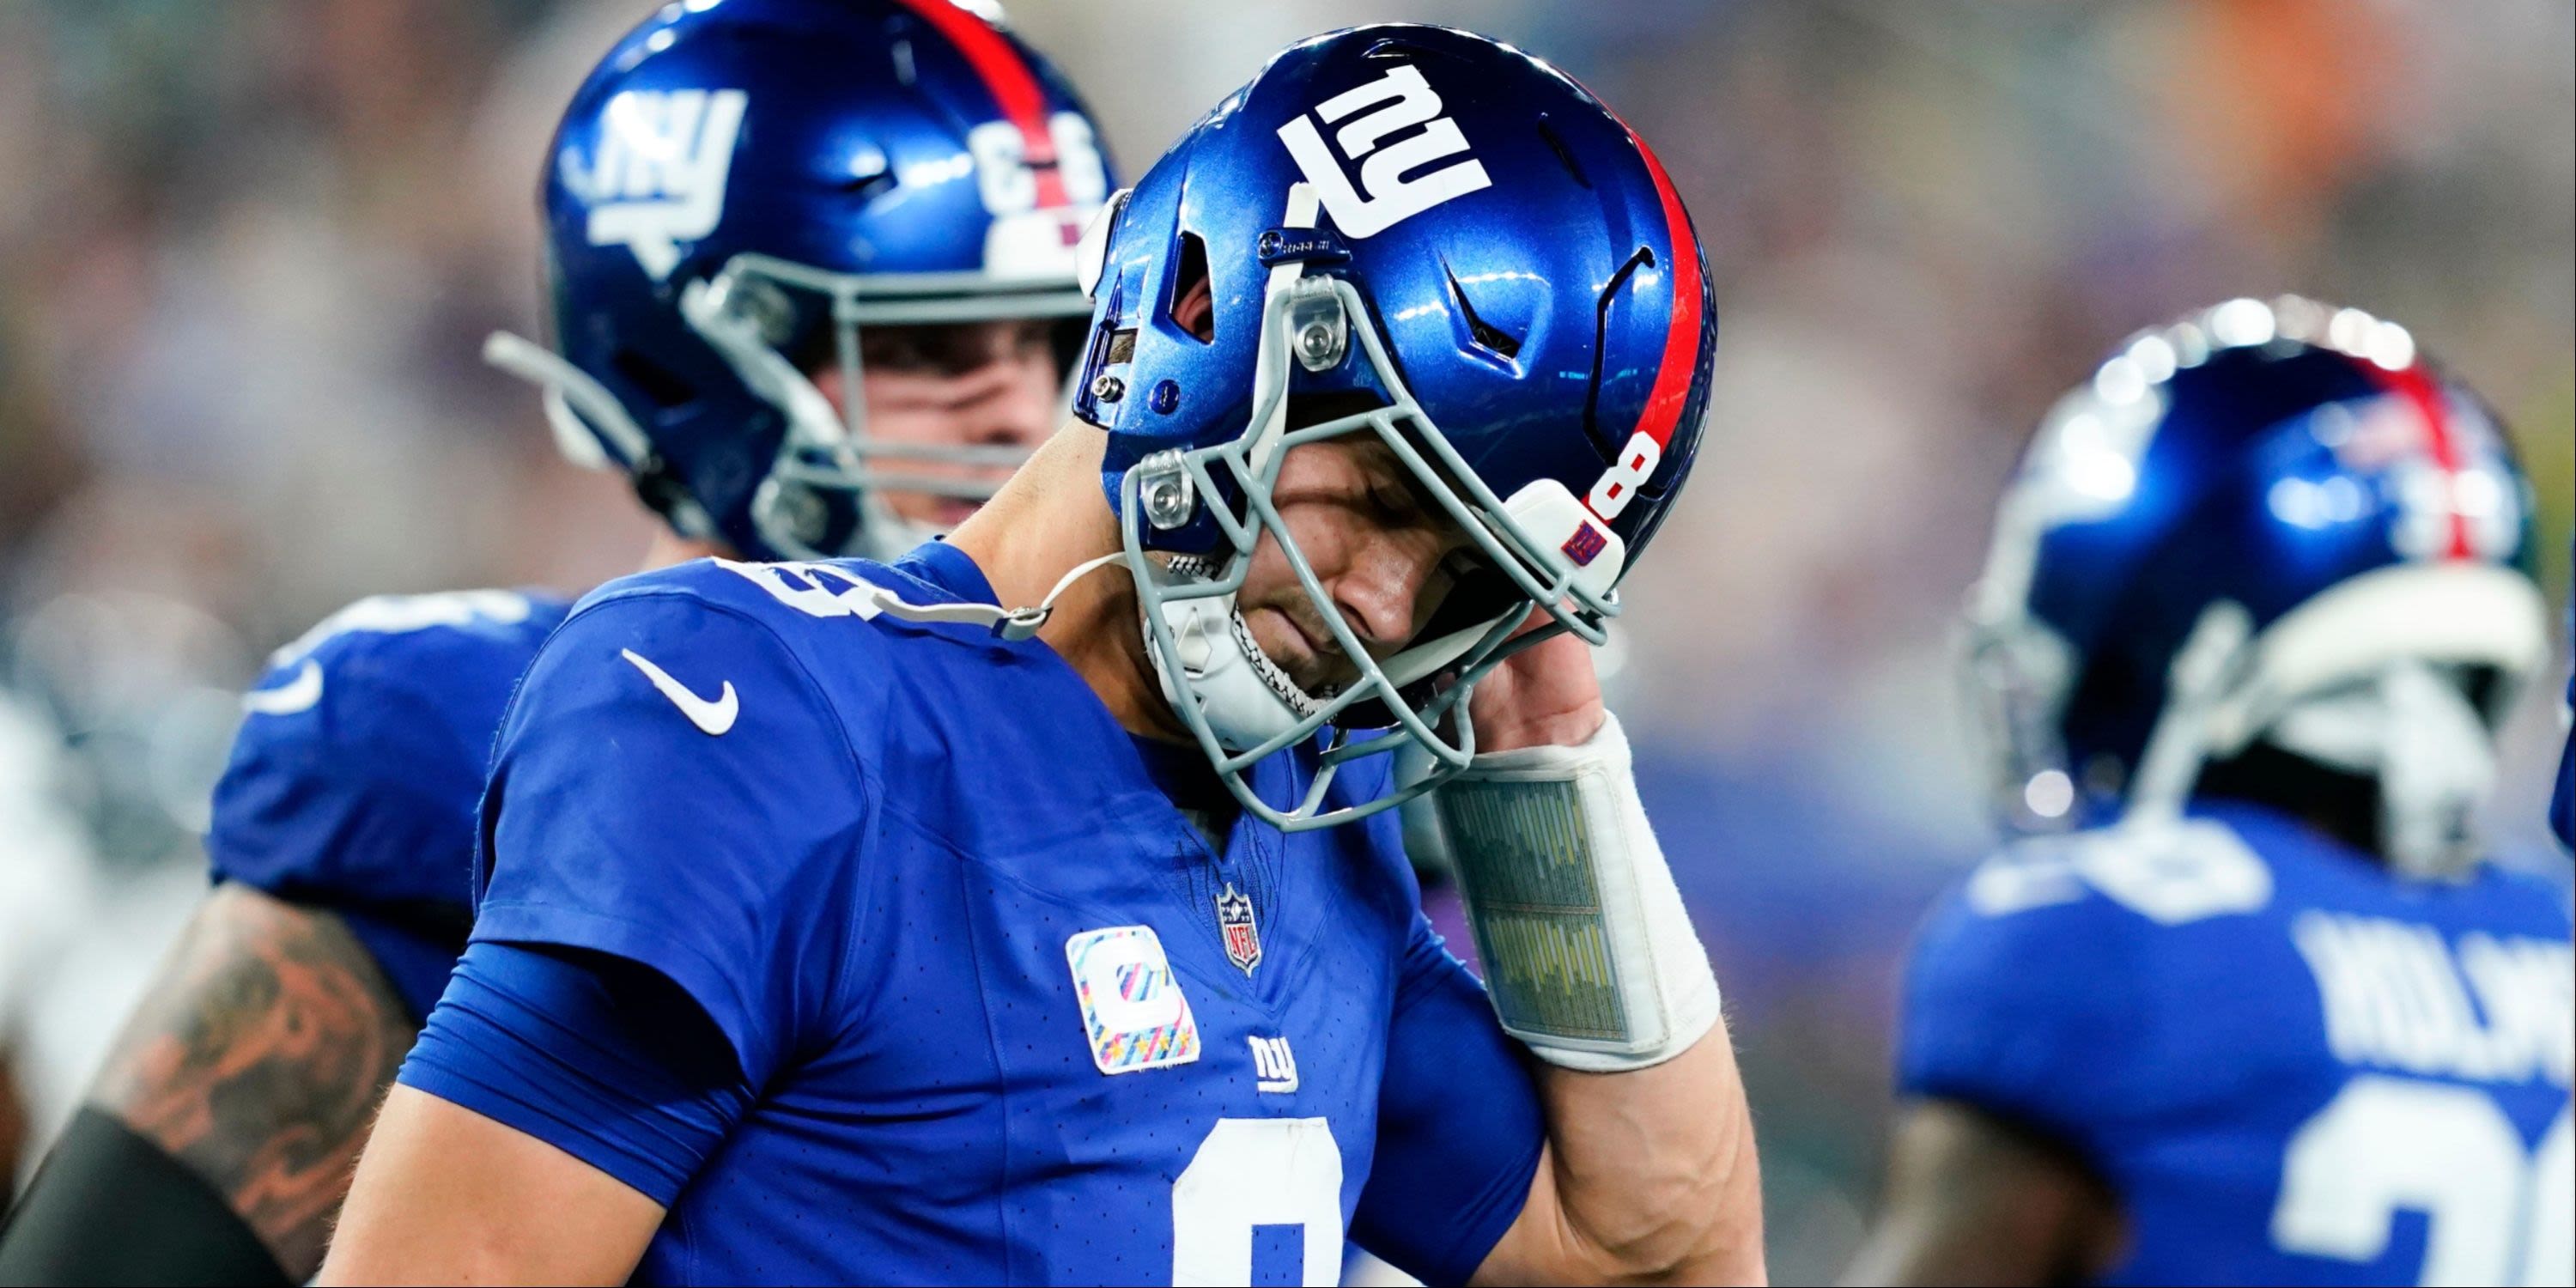 Former NFL GM Believes Giants Could be a ‘Train Wreck’ With Slow Start